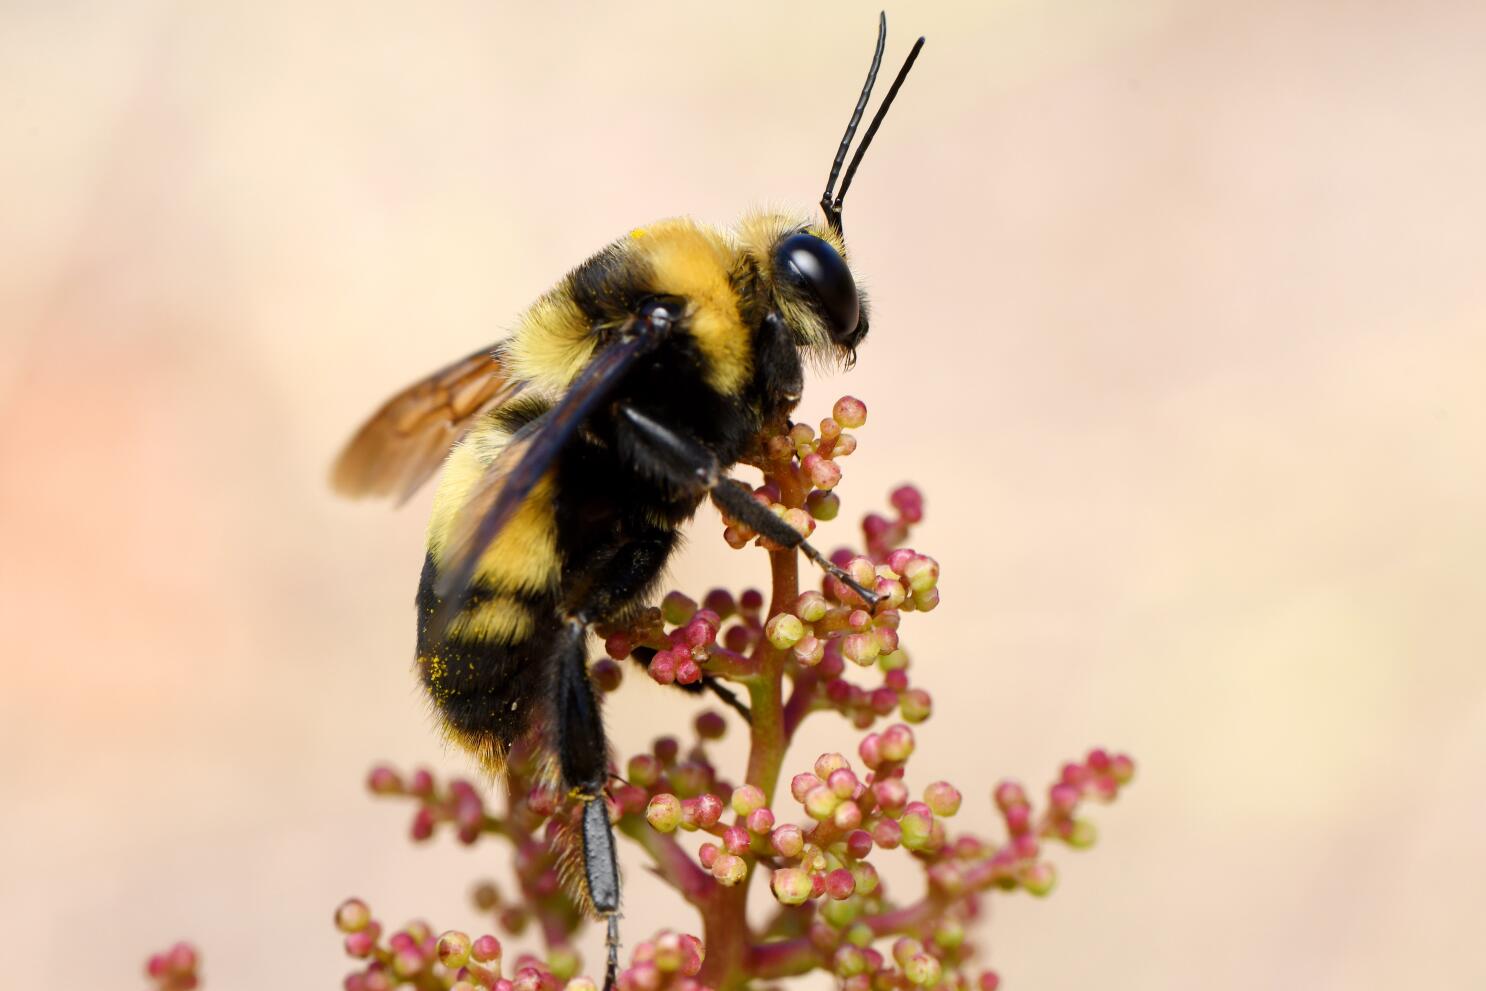 Bumblebees can be protected as “fish” California court rules - Los Angeles  Times